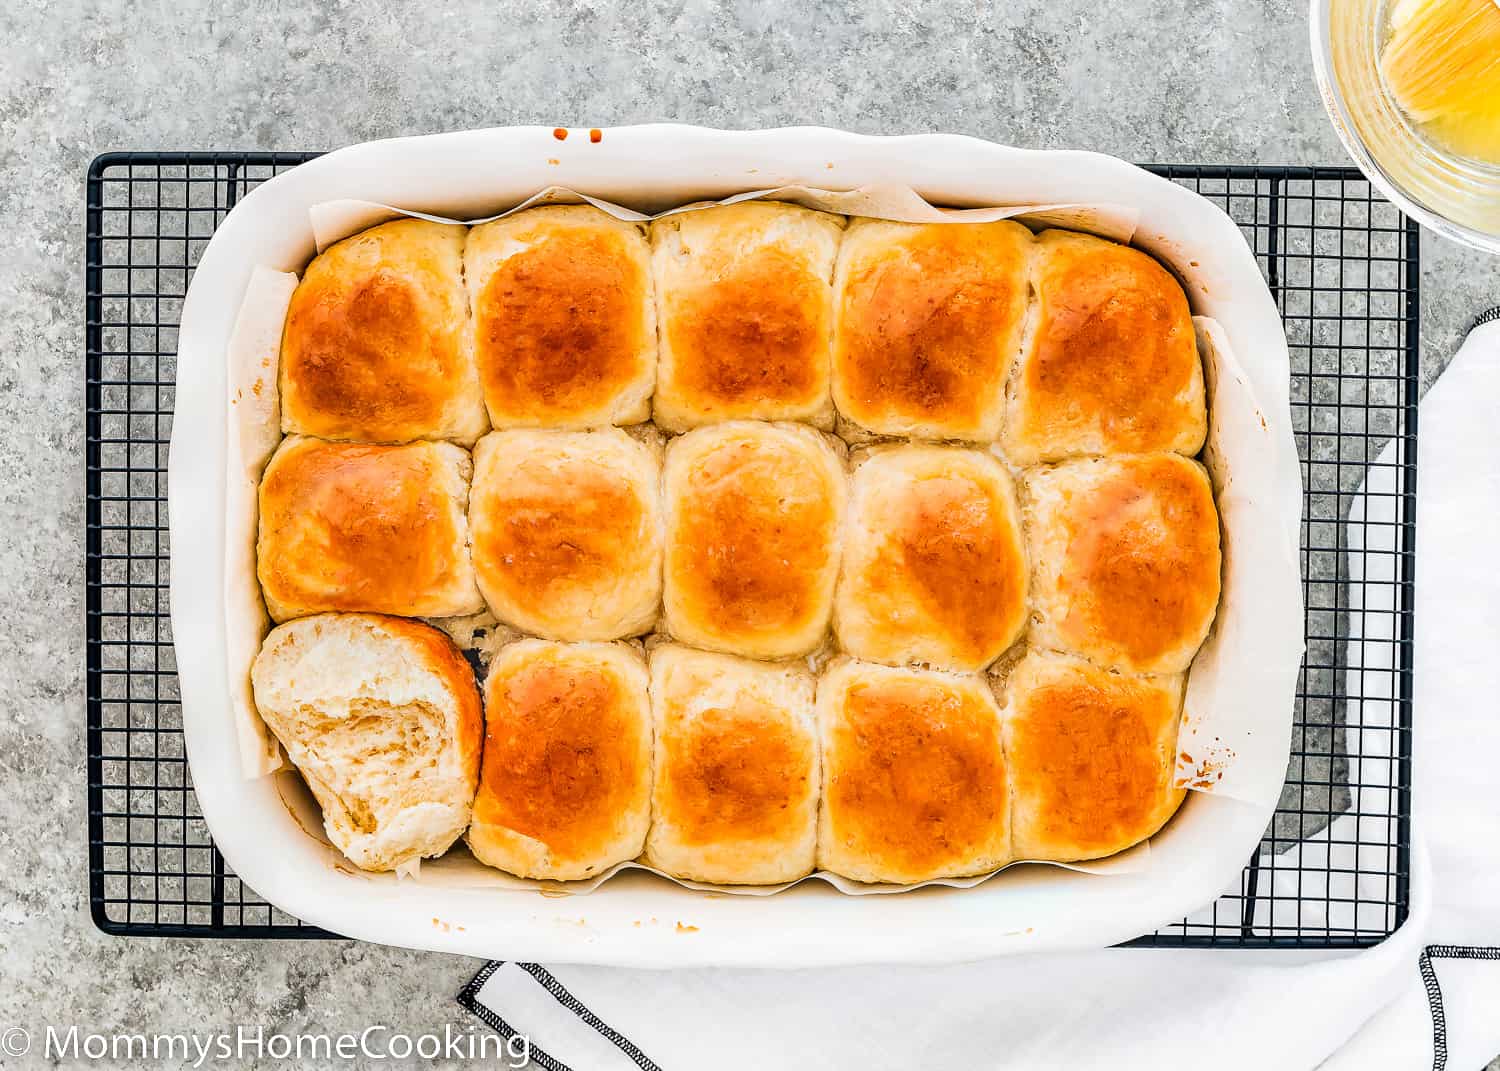 egg-free homemade hawaiian rolls in a baking dish over a gray surface.